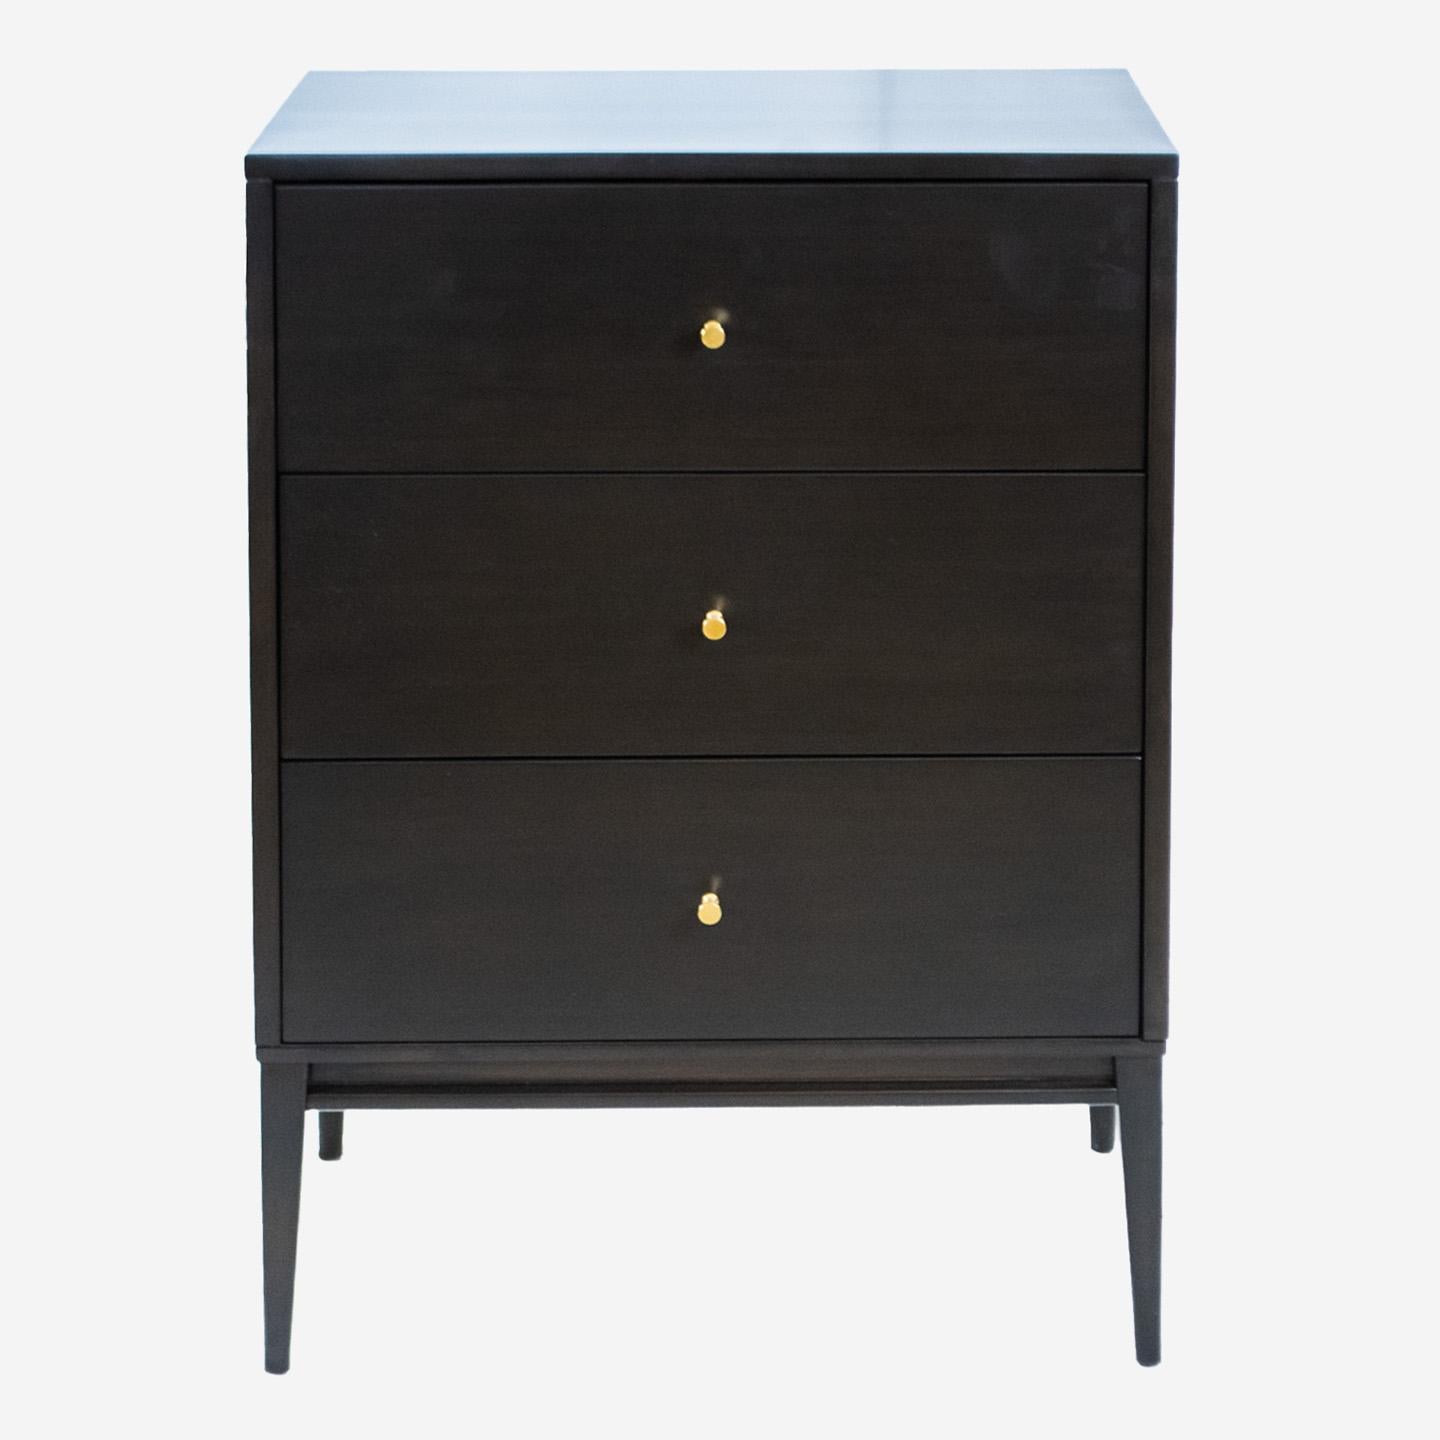 Designed by internationally known contemporary designer Paul McCobb, we offer this very special pair of tall night stands constructed in birchwood and lacquered in blackened brown. The design features stylish tapered legs and well executed